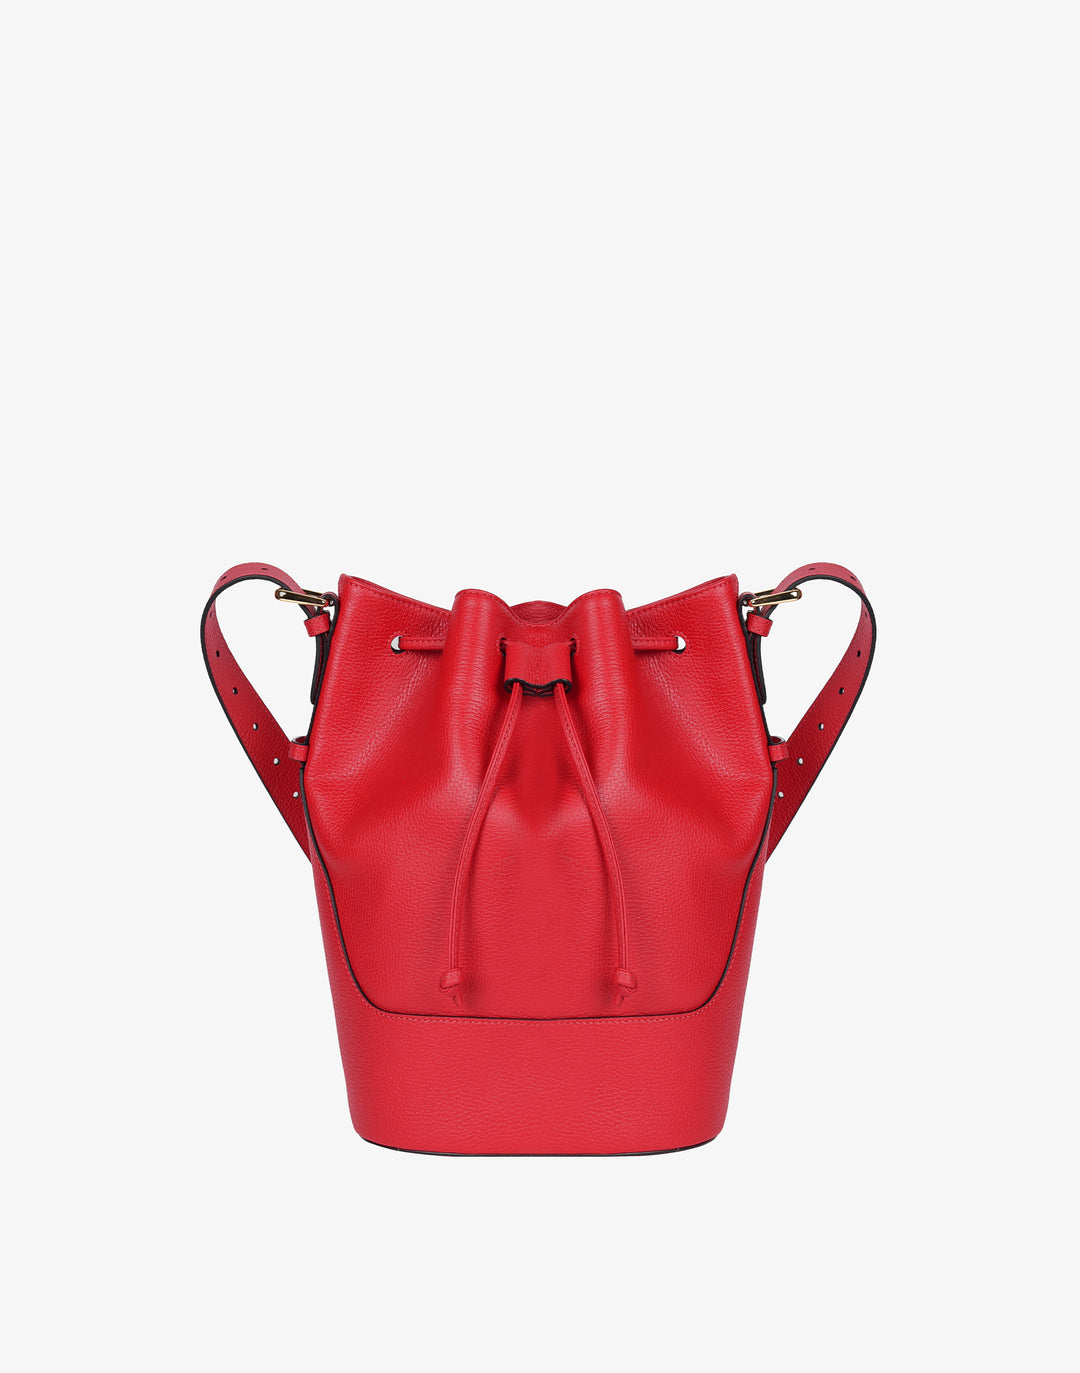 hyer goods recycled leather cinch bucket bag red#color_redhyer goods recycled leather cinch bucket bag red#color_red